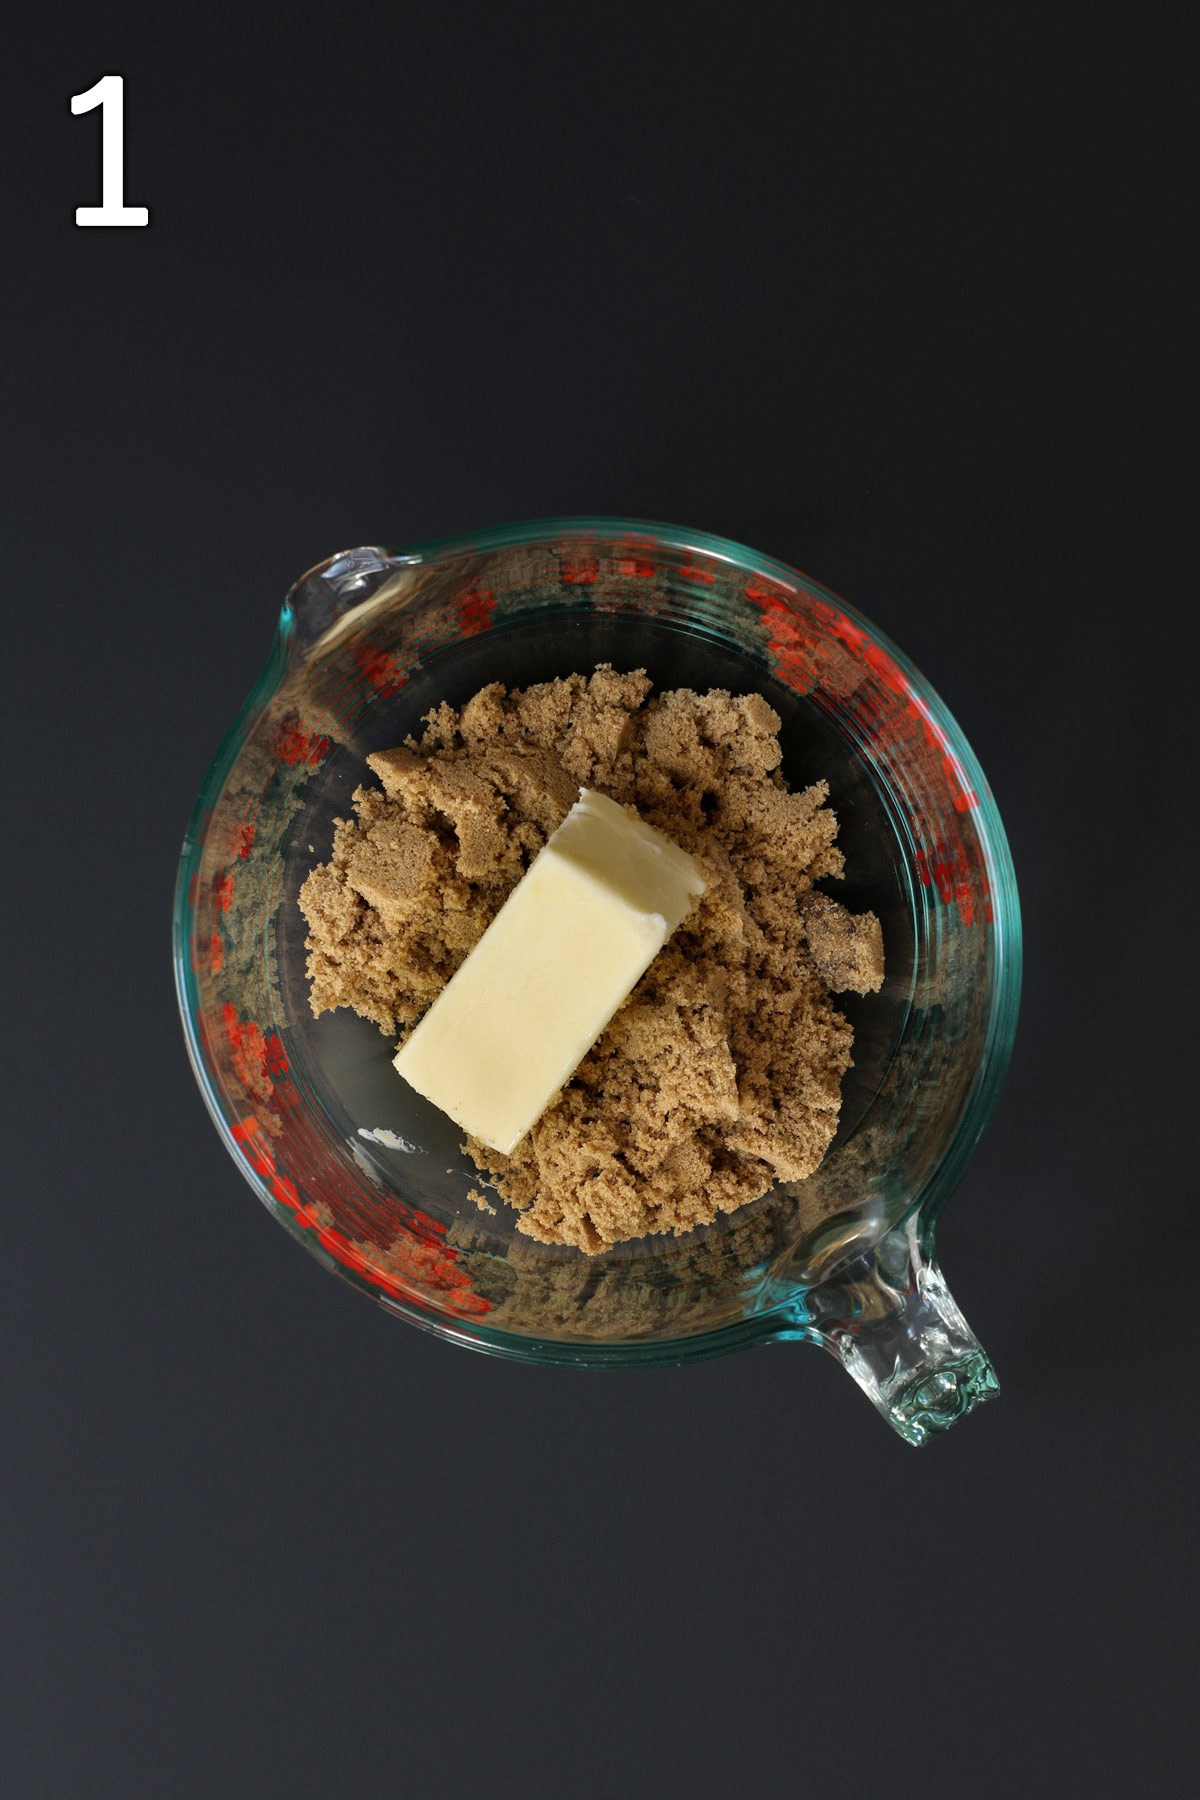 brown sugar and stick of softened butter in glass pyrex bowl.